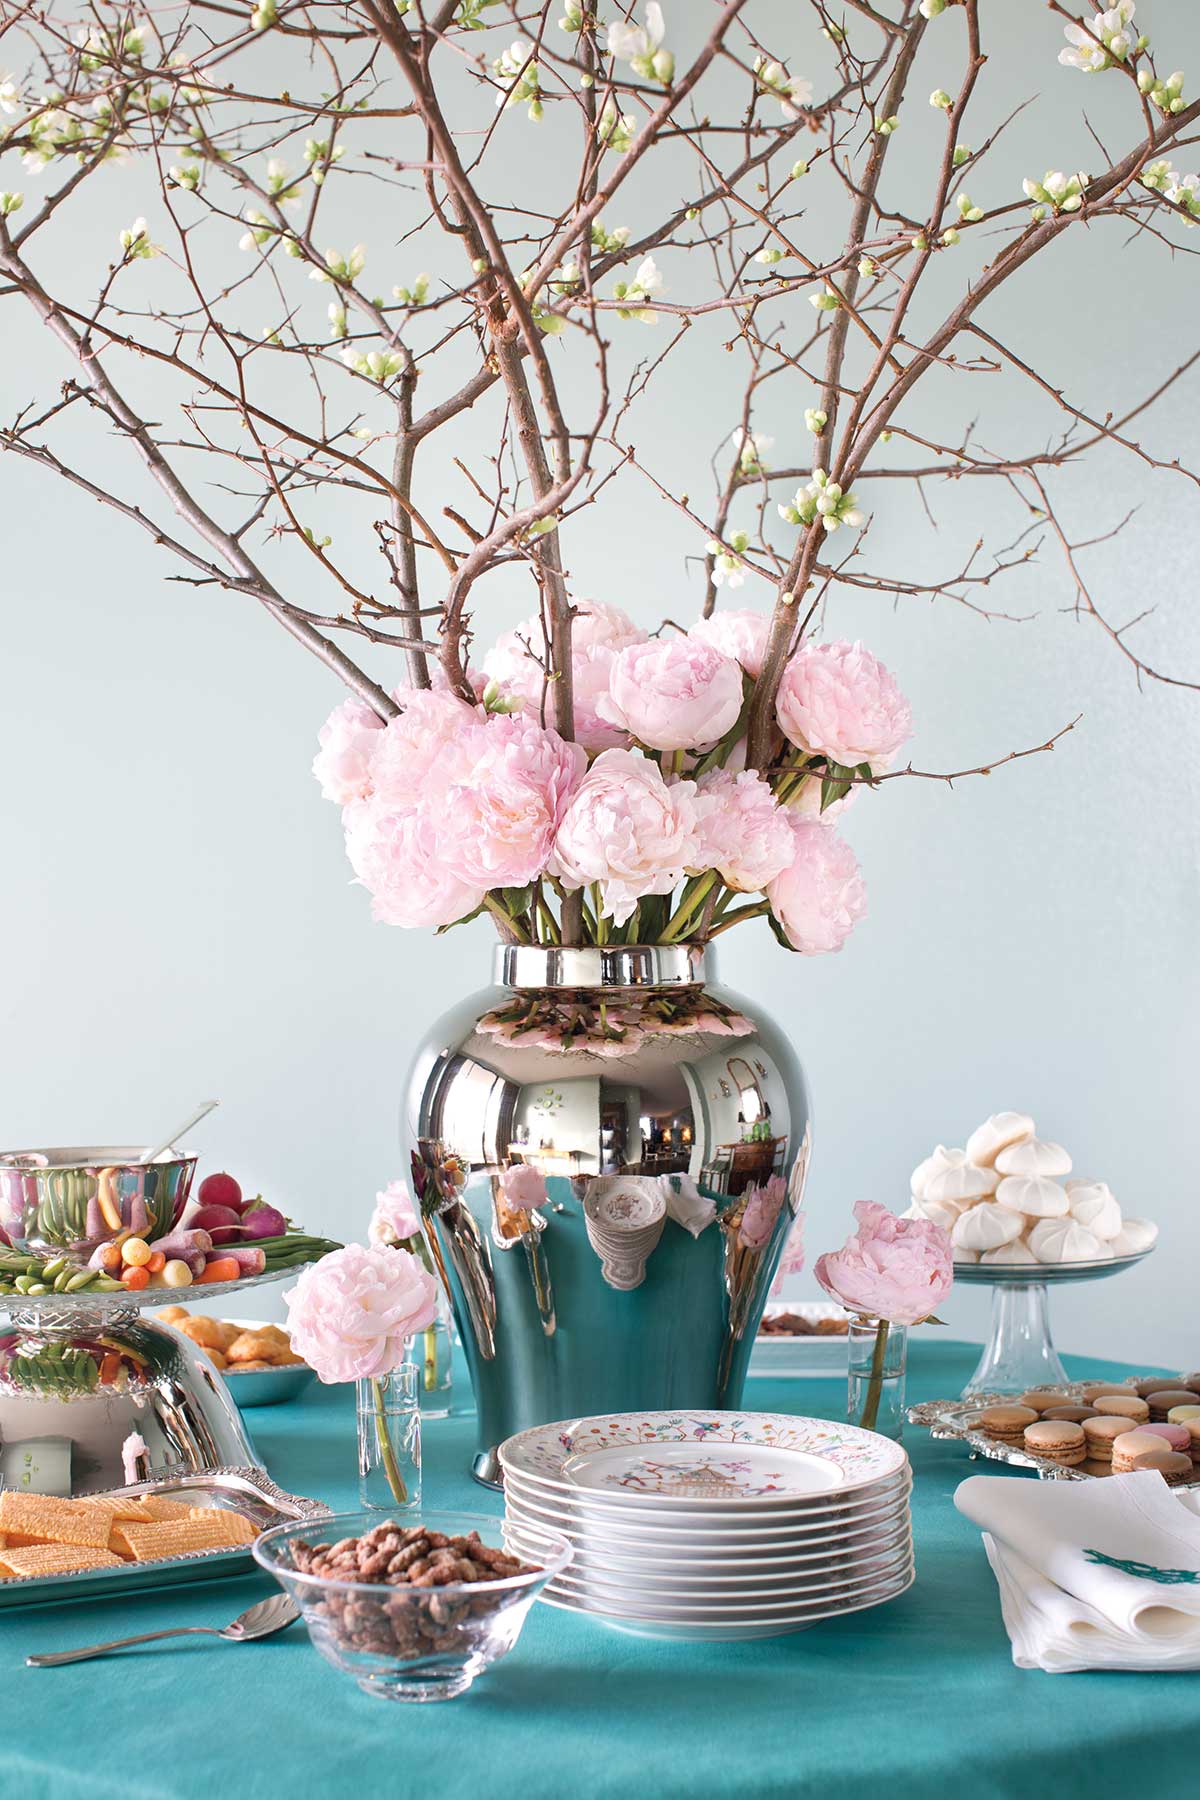 A tangle of quince with frothy pink peonies and shot glasses with single peony blossoms anchor a table set with hors d'oeuvres at this Jennifer Boles cocktail party.